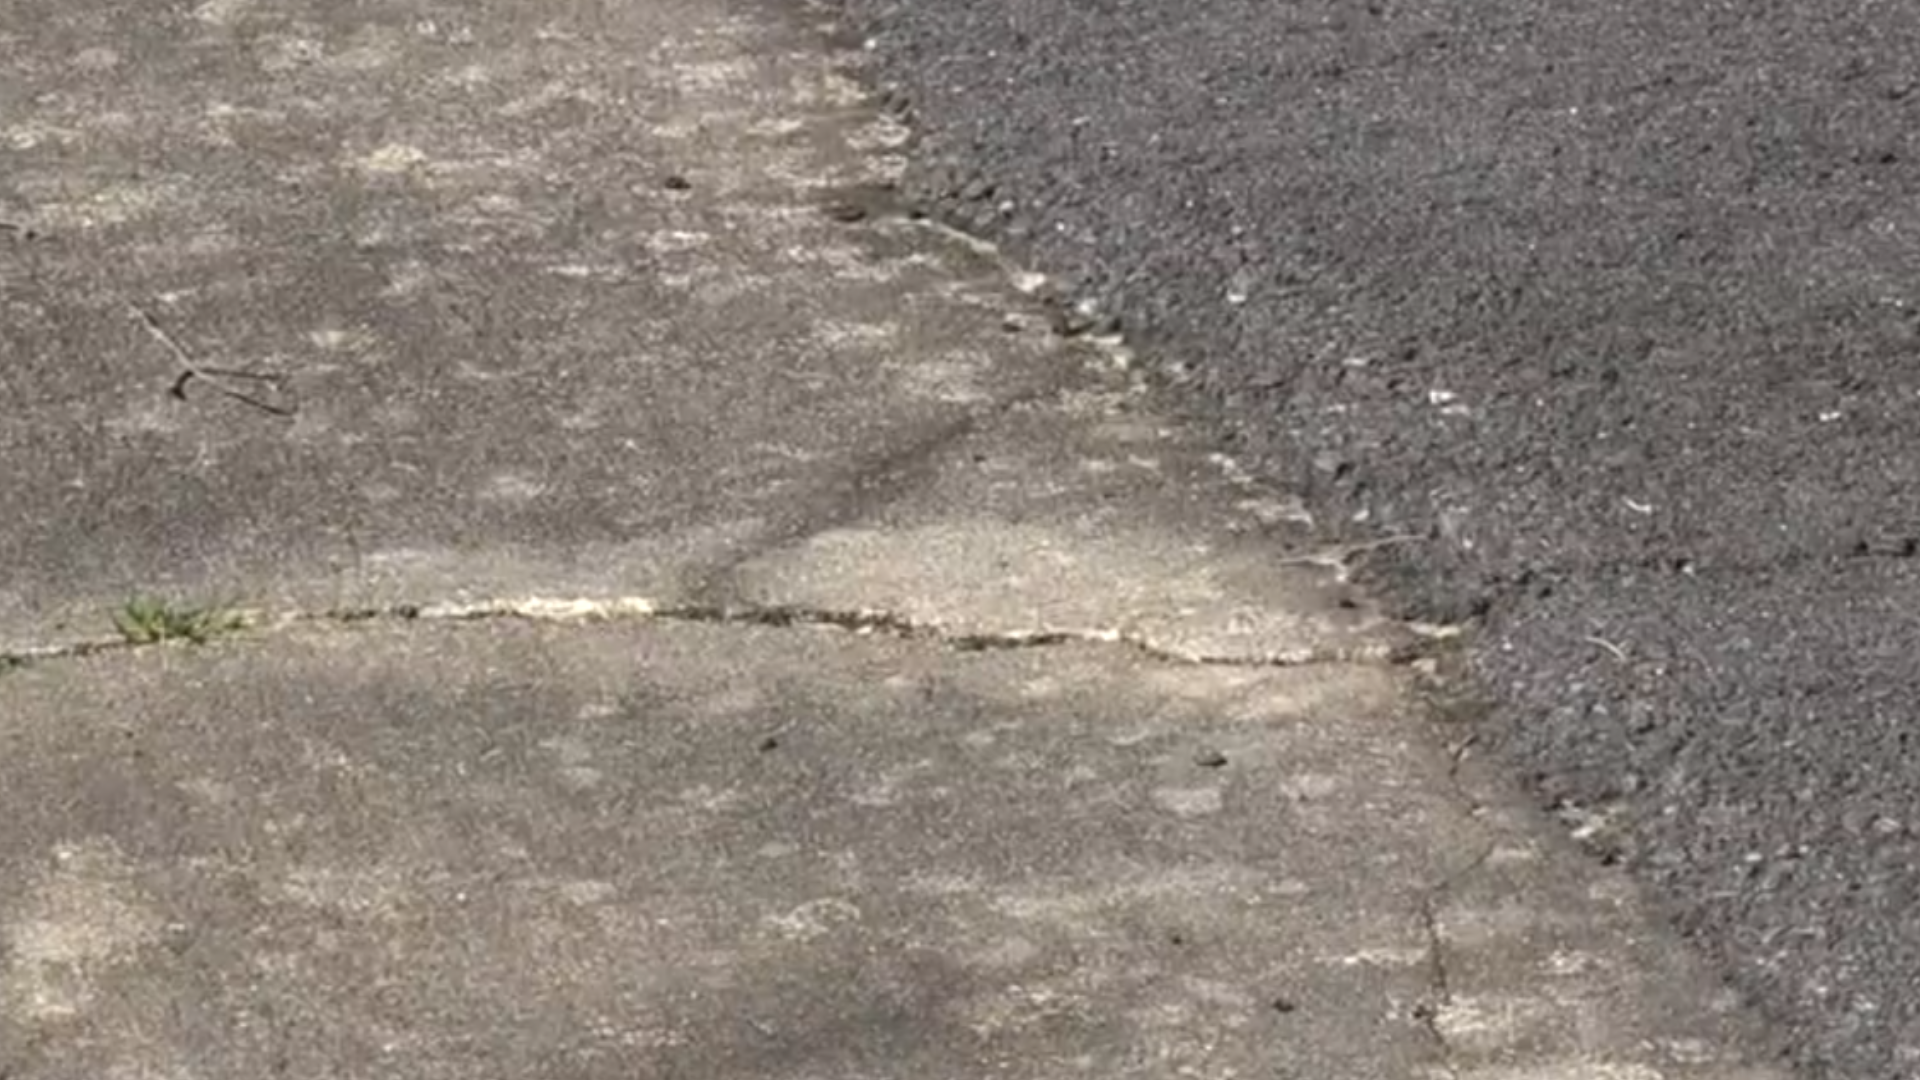 A Winston-Salem woman says a crew offered to pave her driveway for free and then demanded $6,500 for a "poor" job.